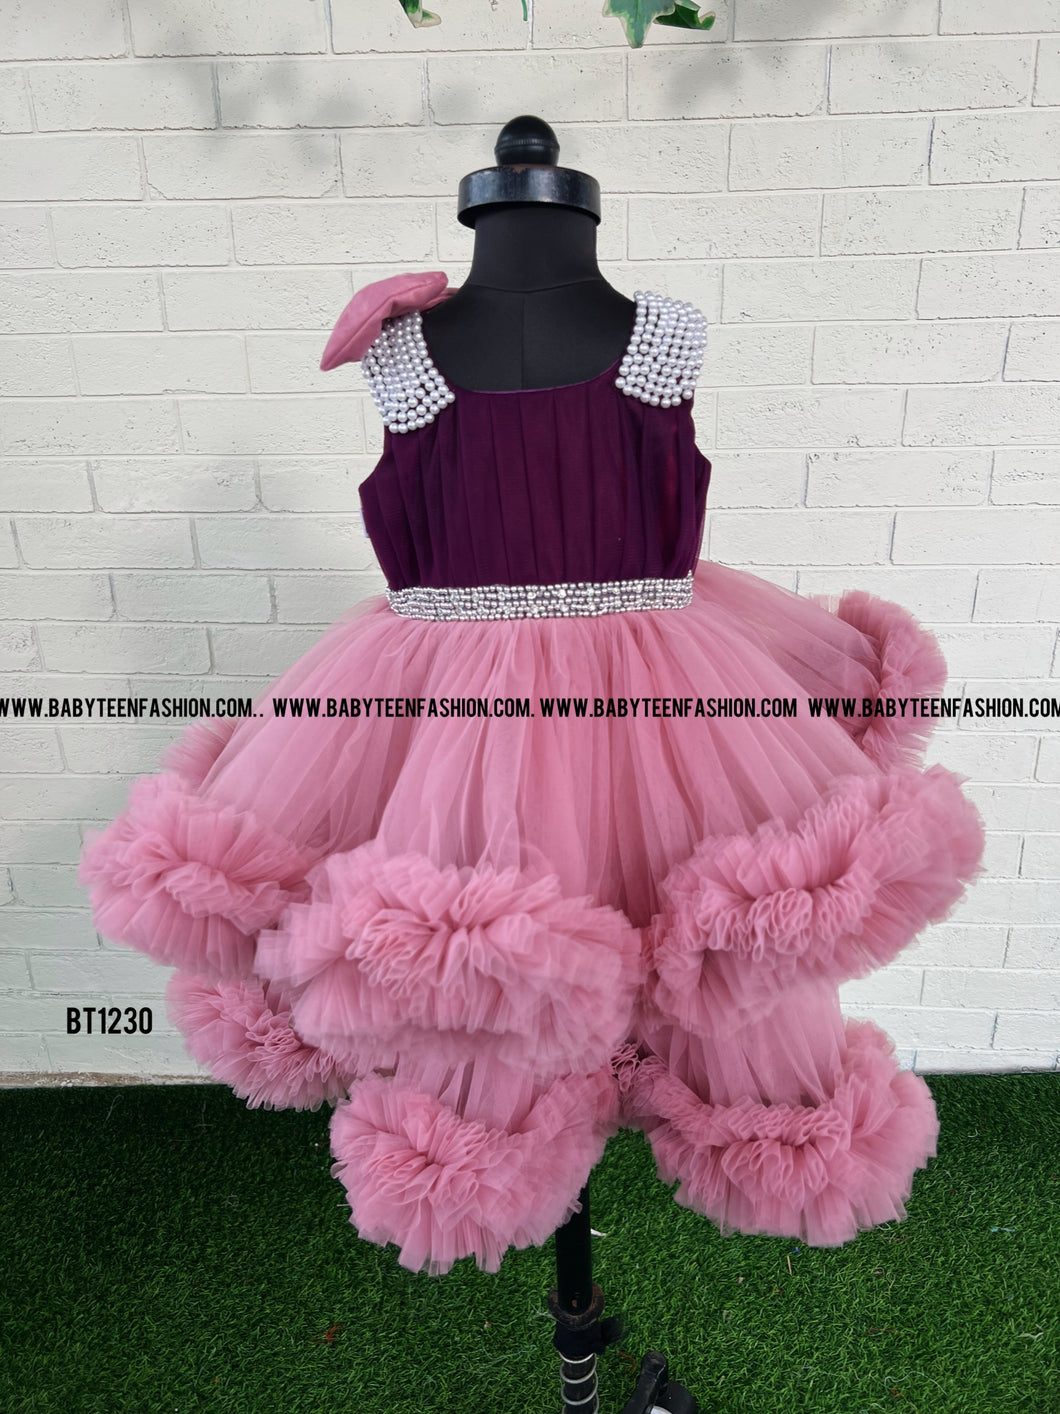 BT1230 Pink Purple Heavy Ruffle Birthday Frock With Lace